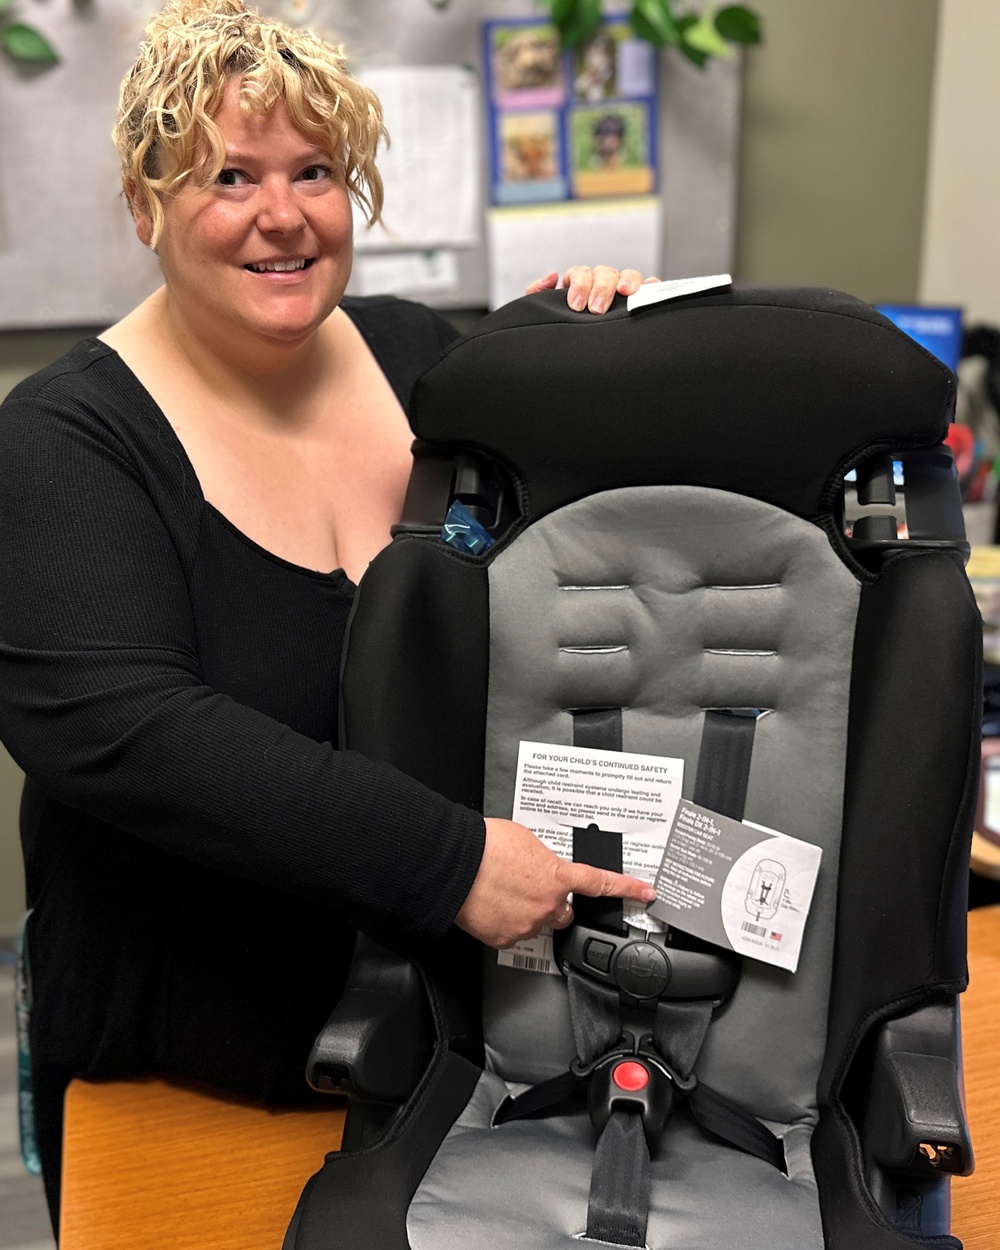 Munson Army Health Center conducts car seat safety inspections